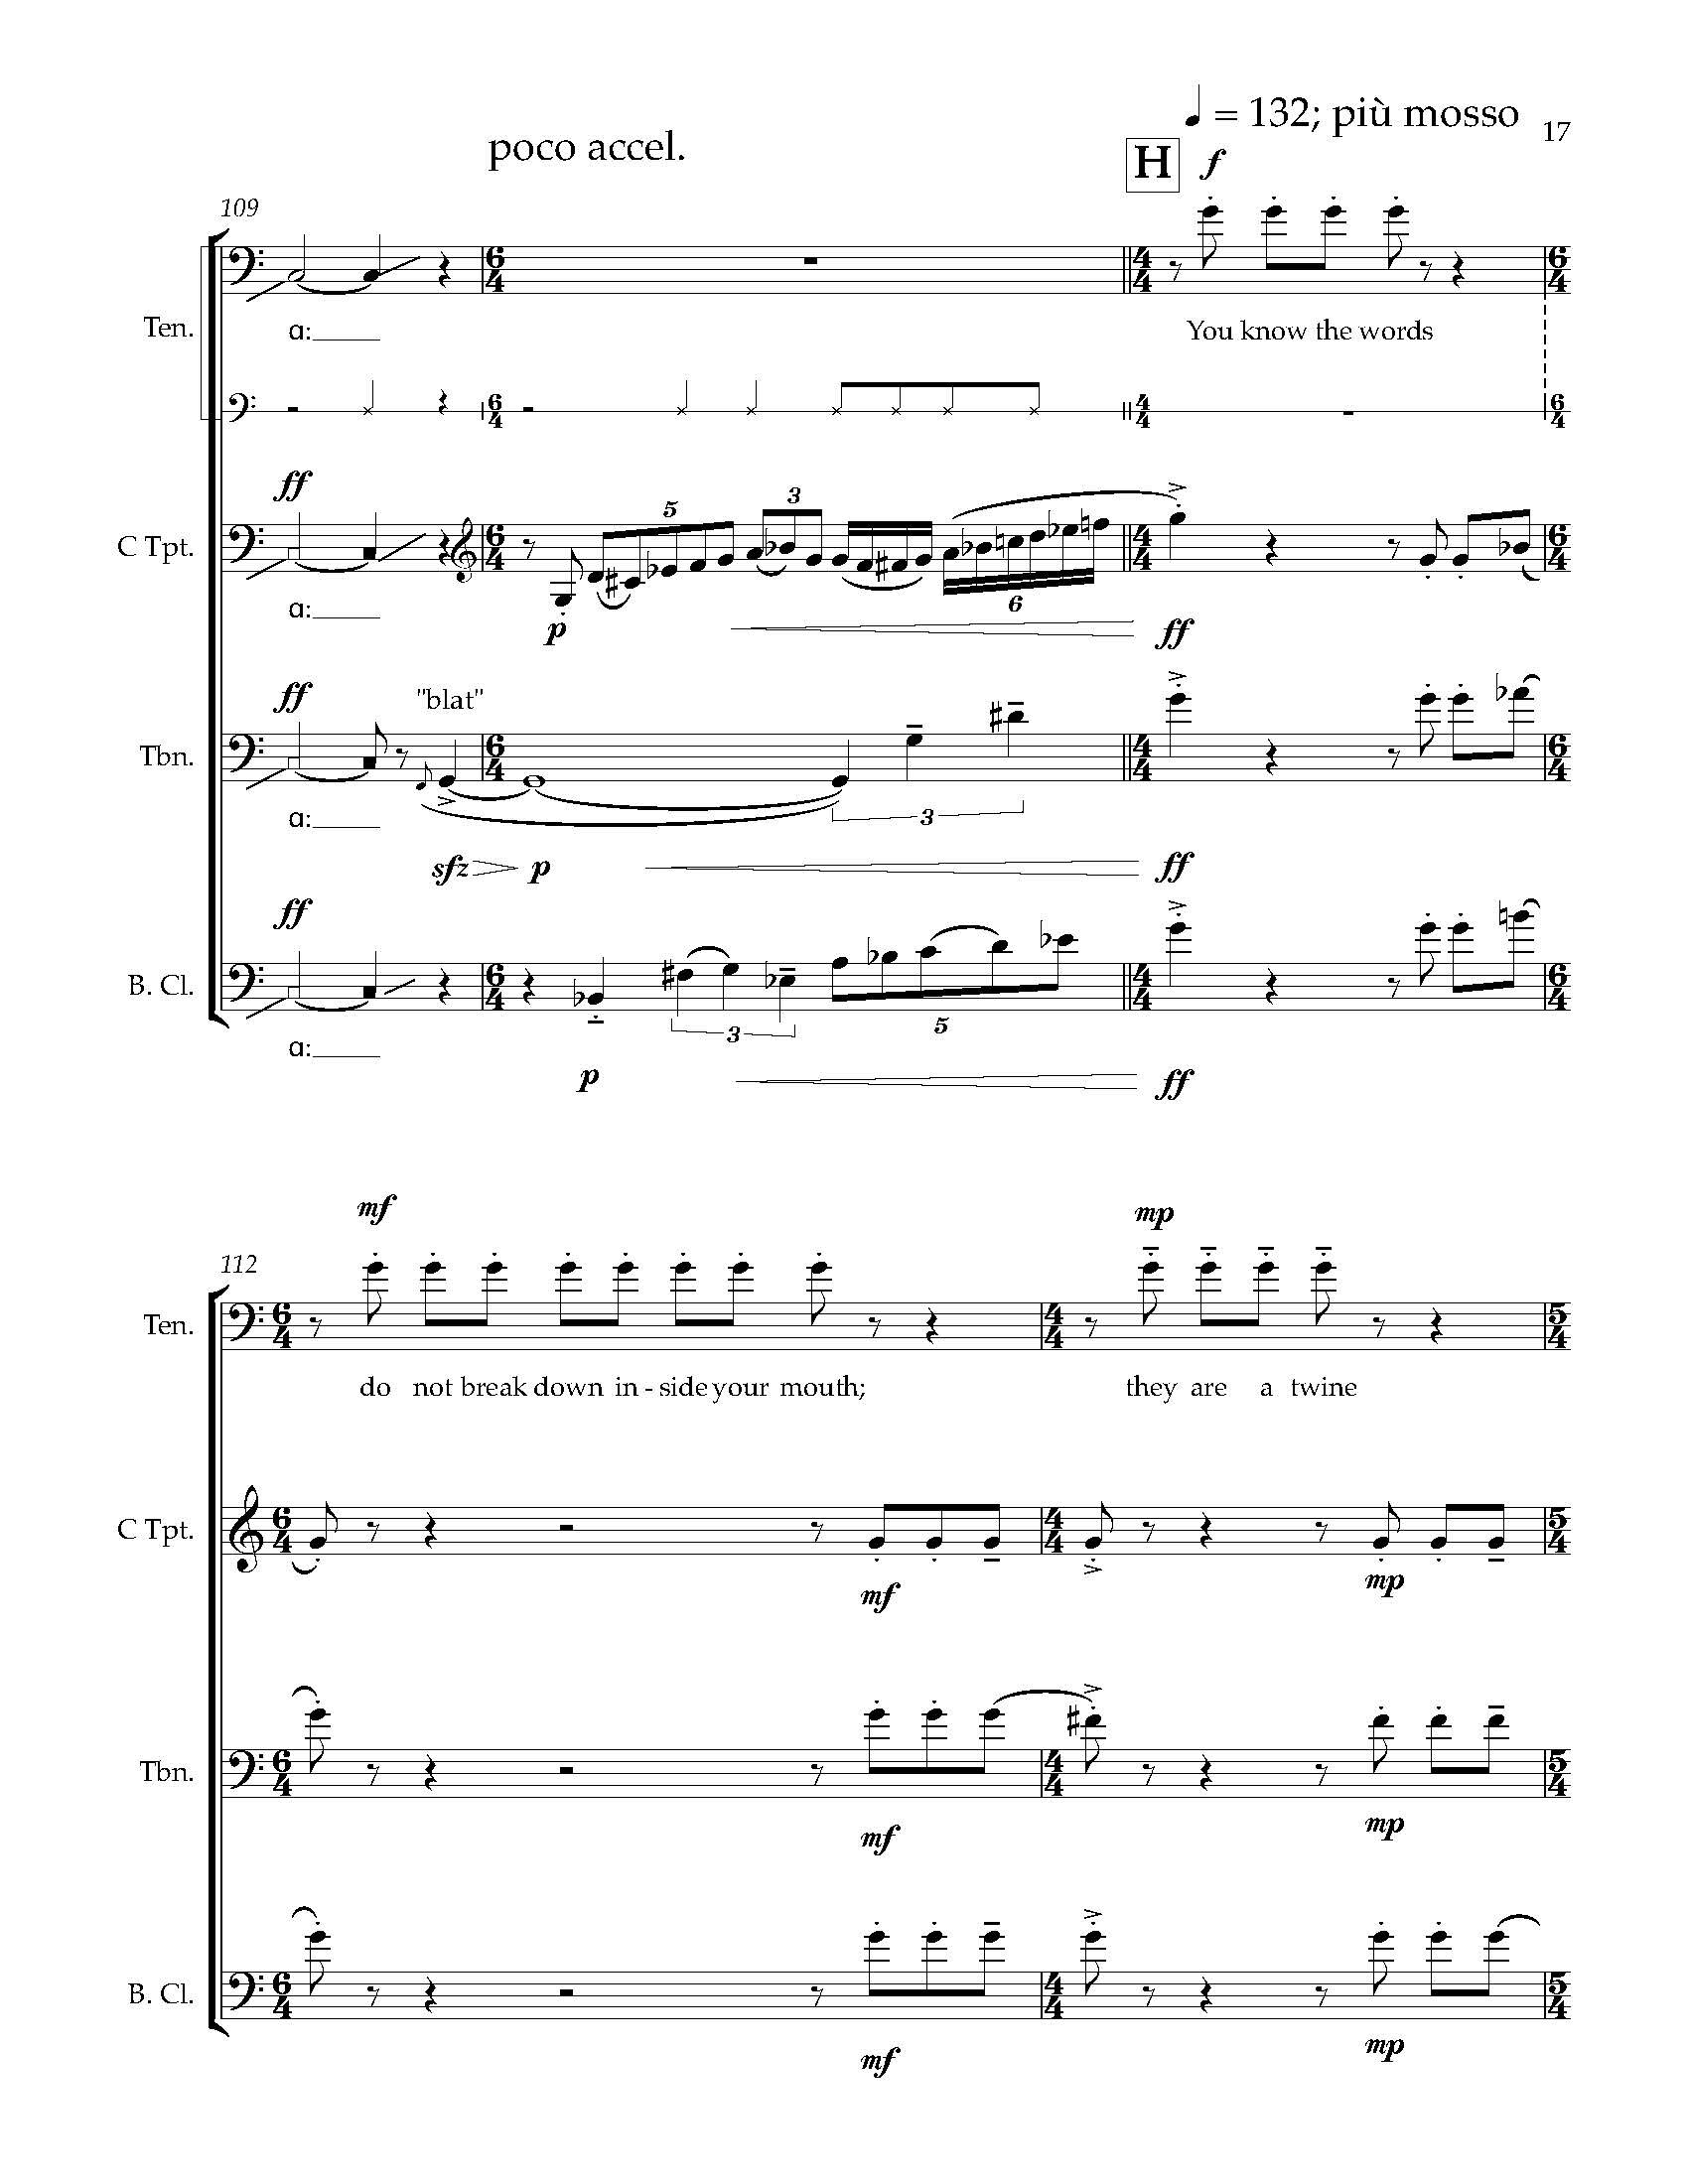 Many Worlds [1] - Complete Score_Page_26.jpg